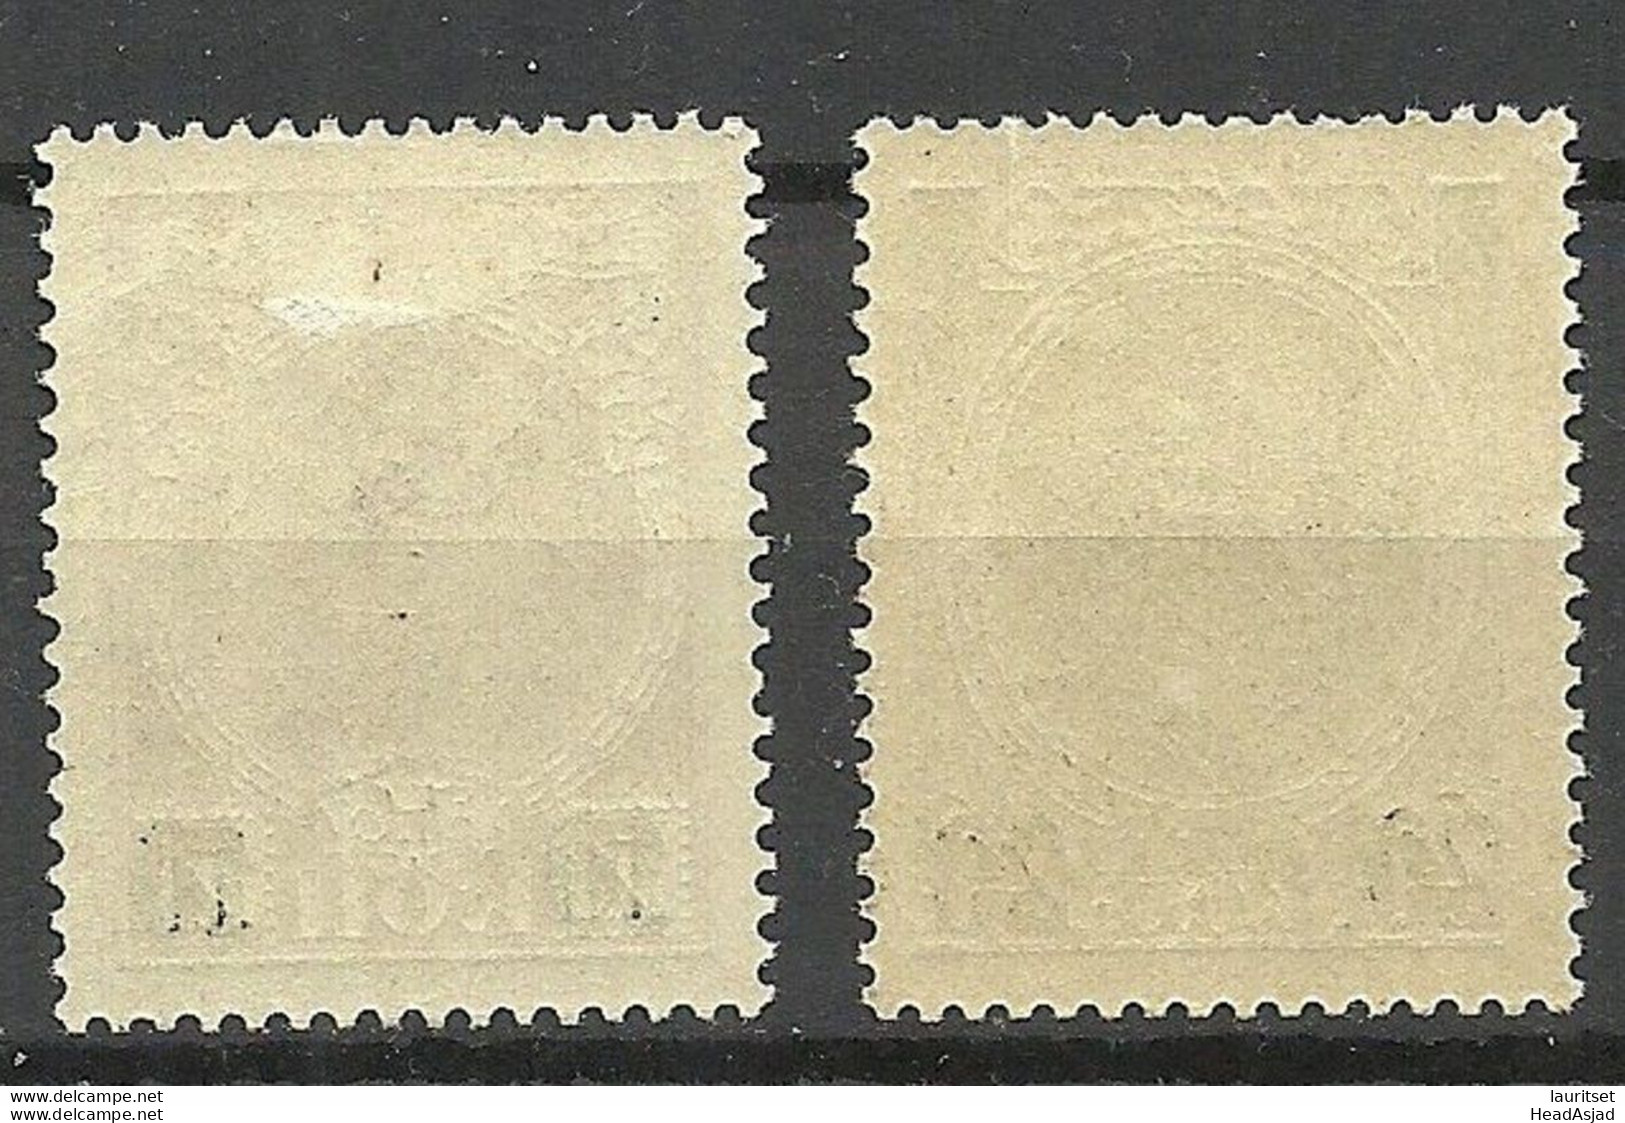 FAUX Russia Romanov Stamp Mi 86 - 87 With ARMENIEN Armenia Opt * Old Forgeries F√§lschungen - Arménie